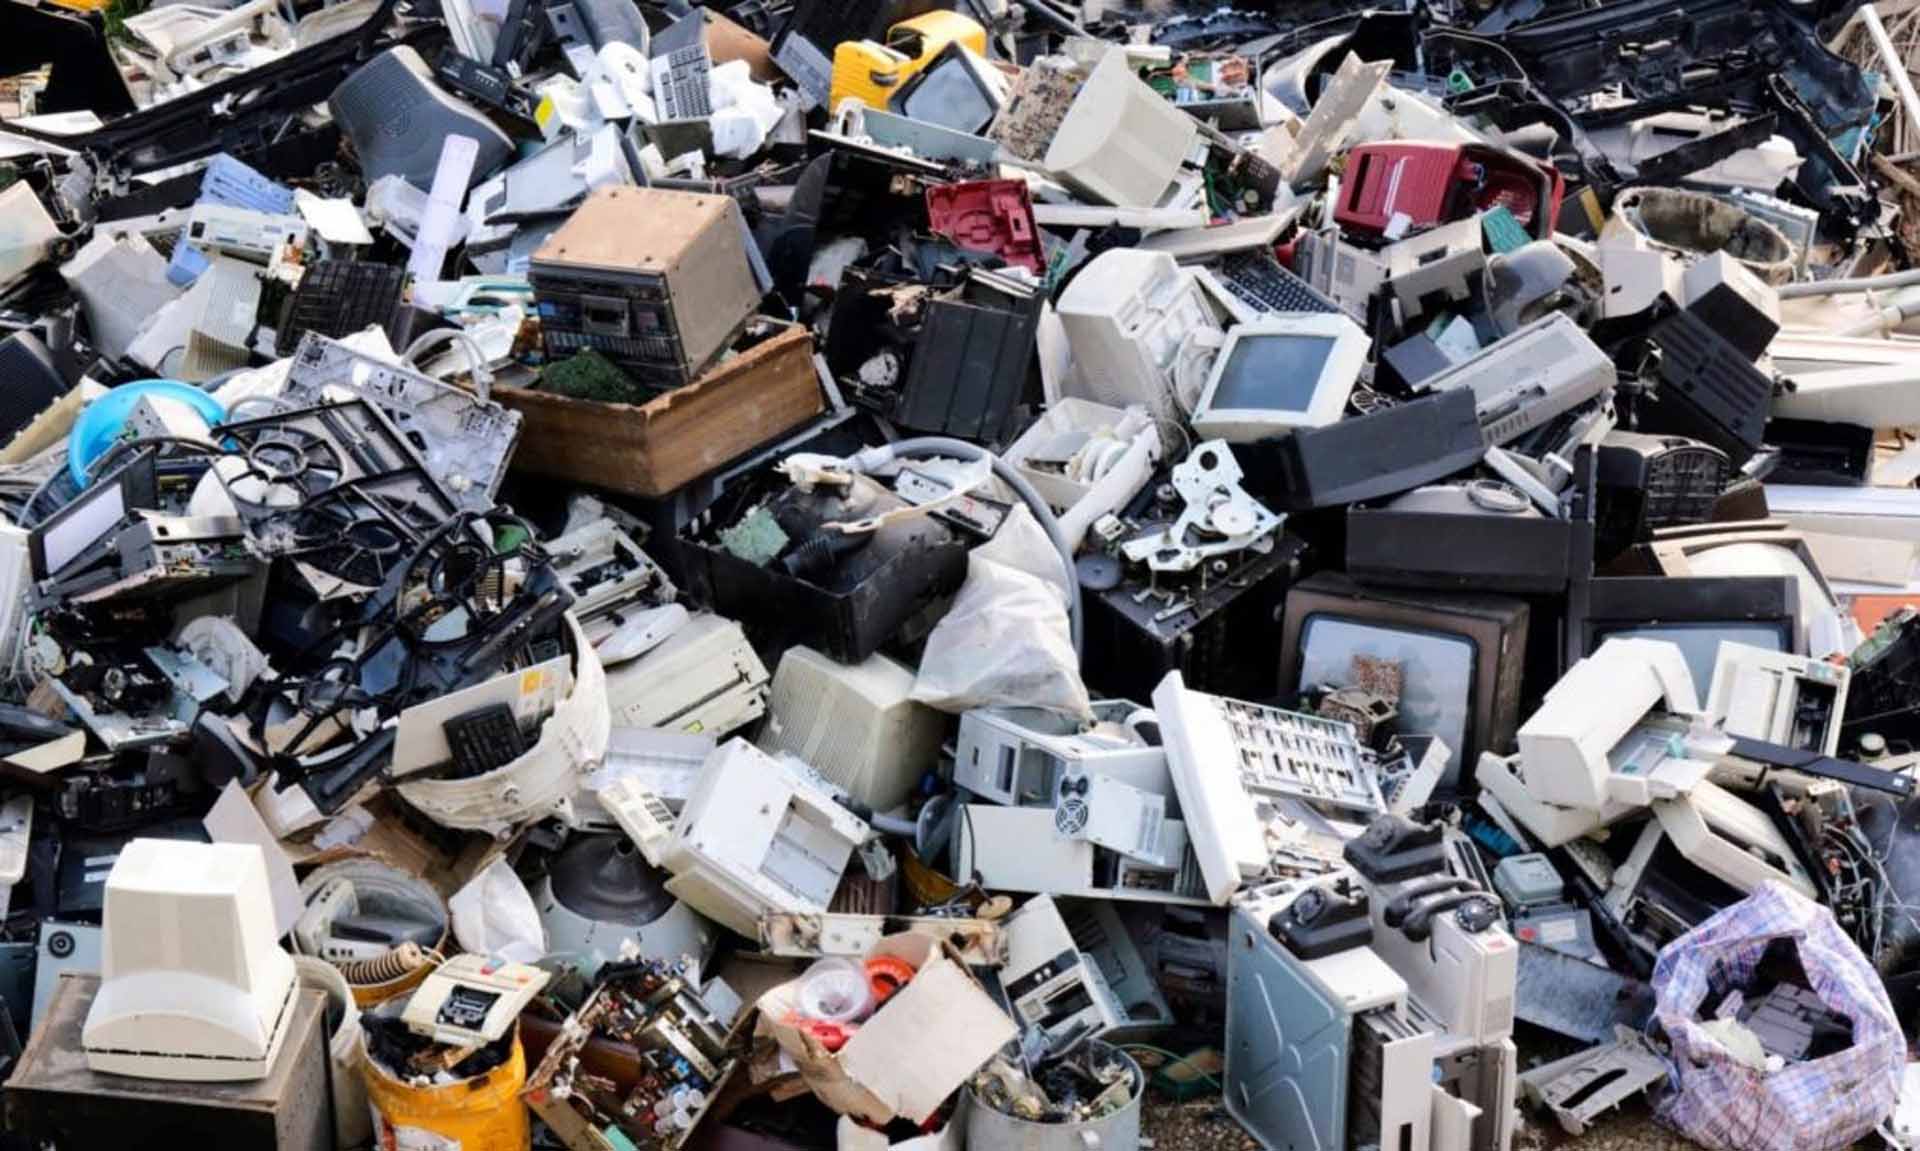 Planned Obsolescence: Why Are Some Products Intentionally Designed With Shorter Lifespans?